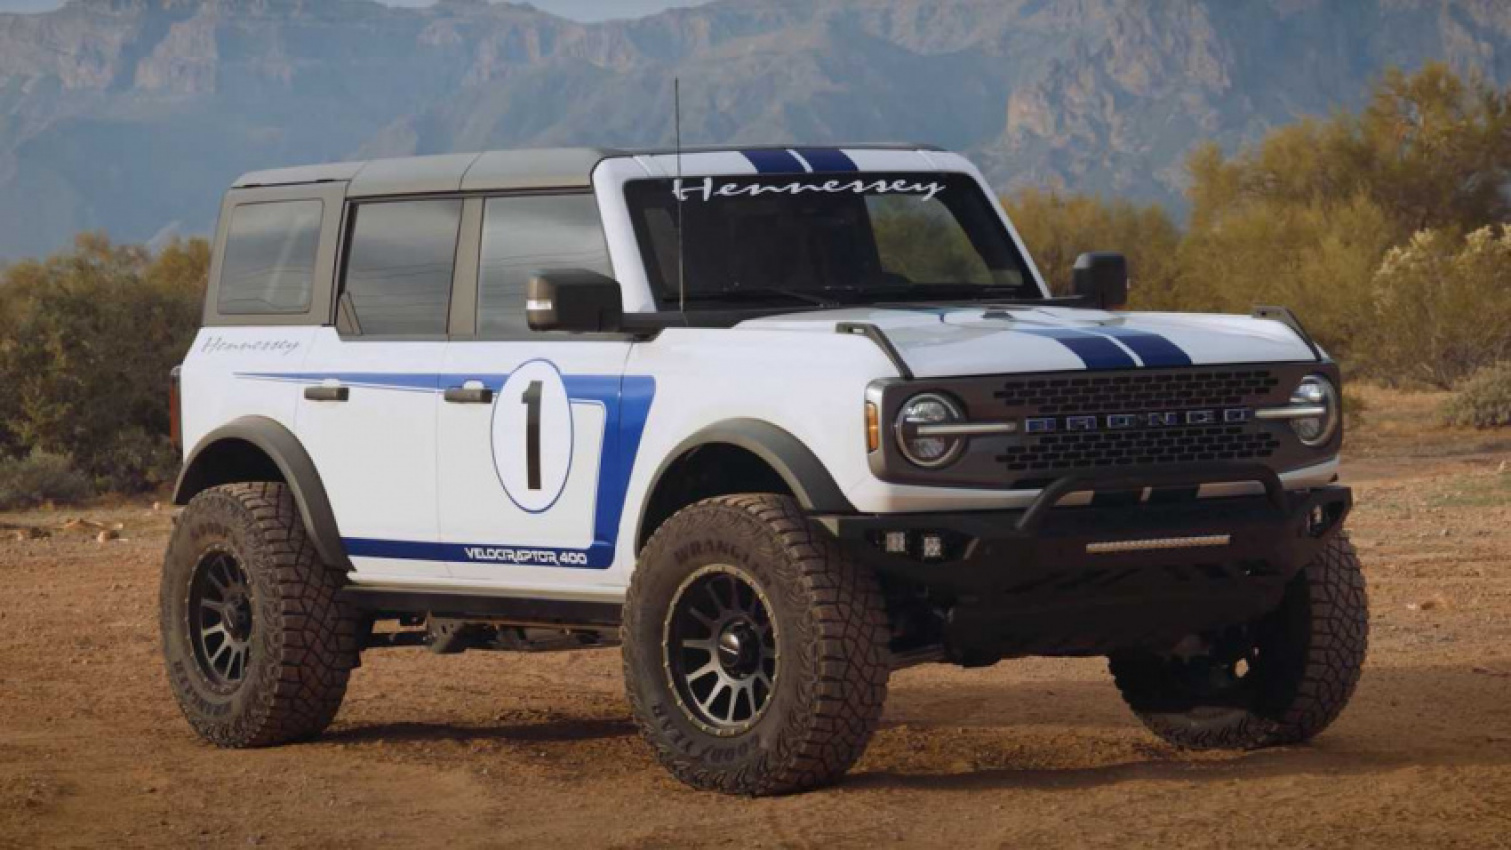 autos, cars, hennessey, see hennessey velociraptor 400 bronco strut its stuff in the desert